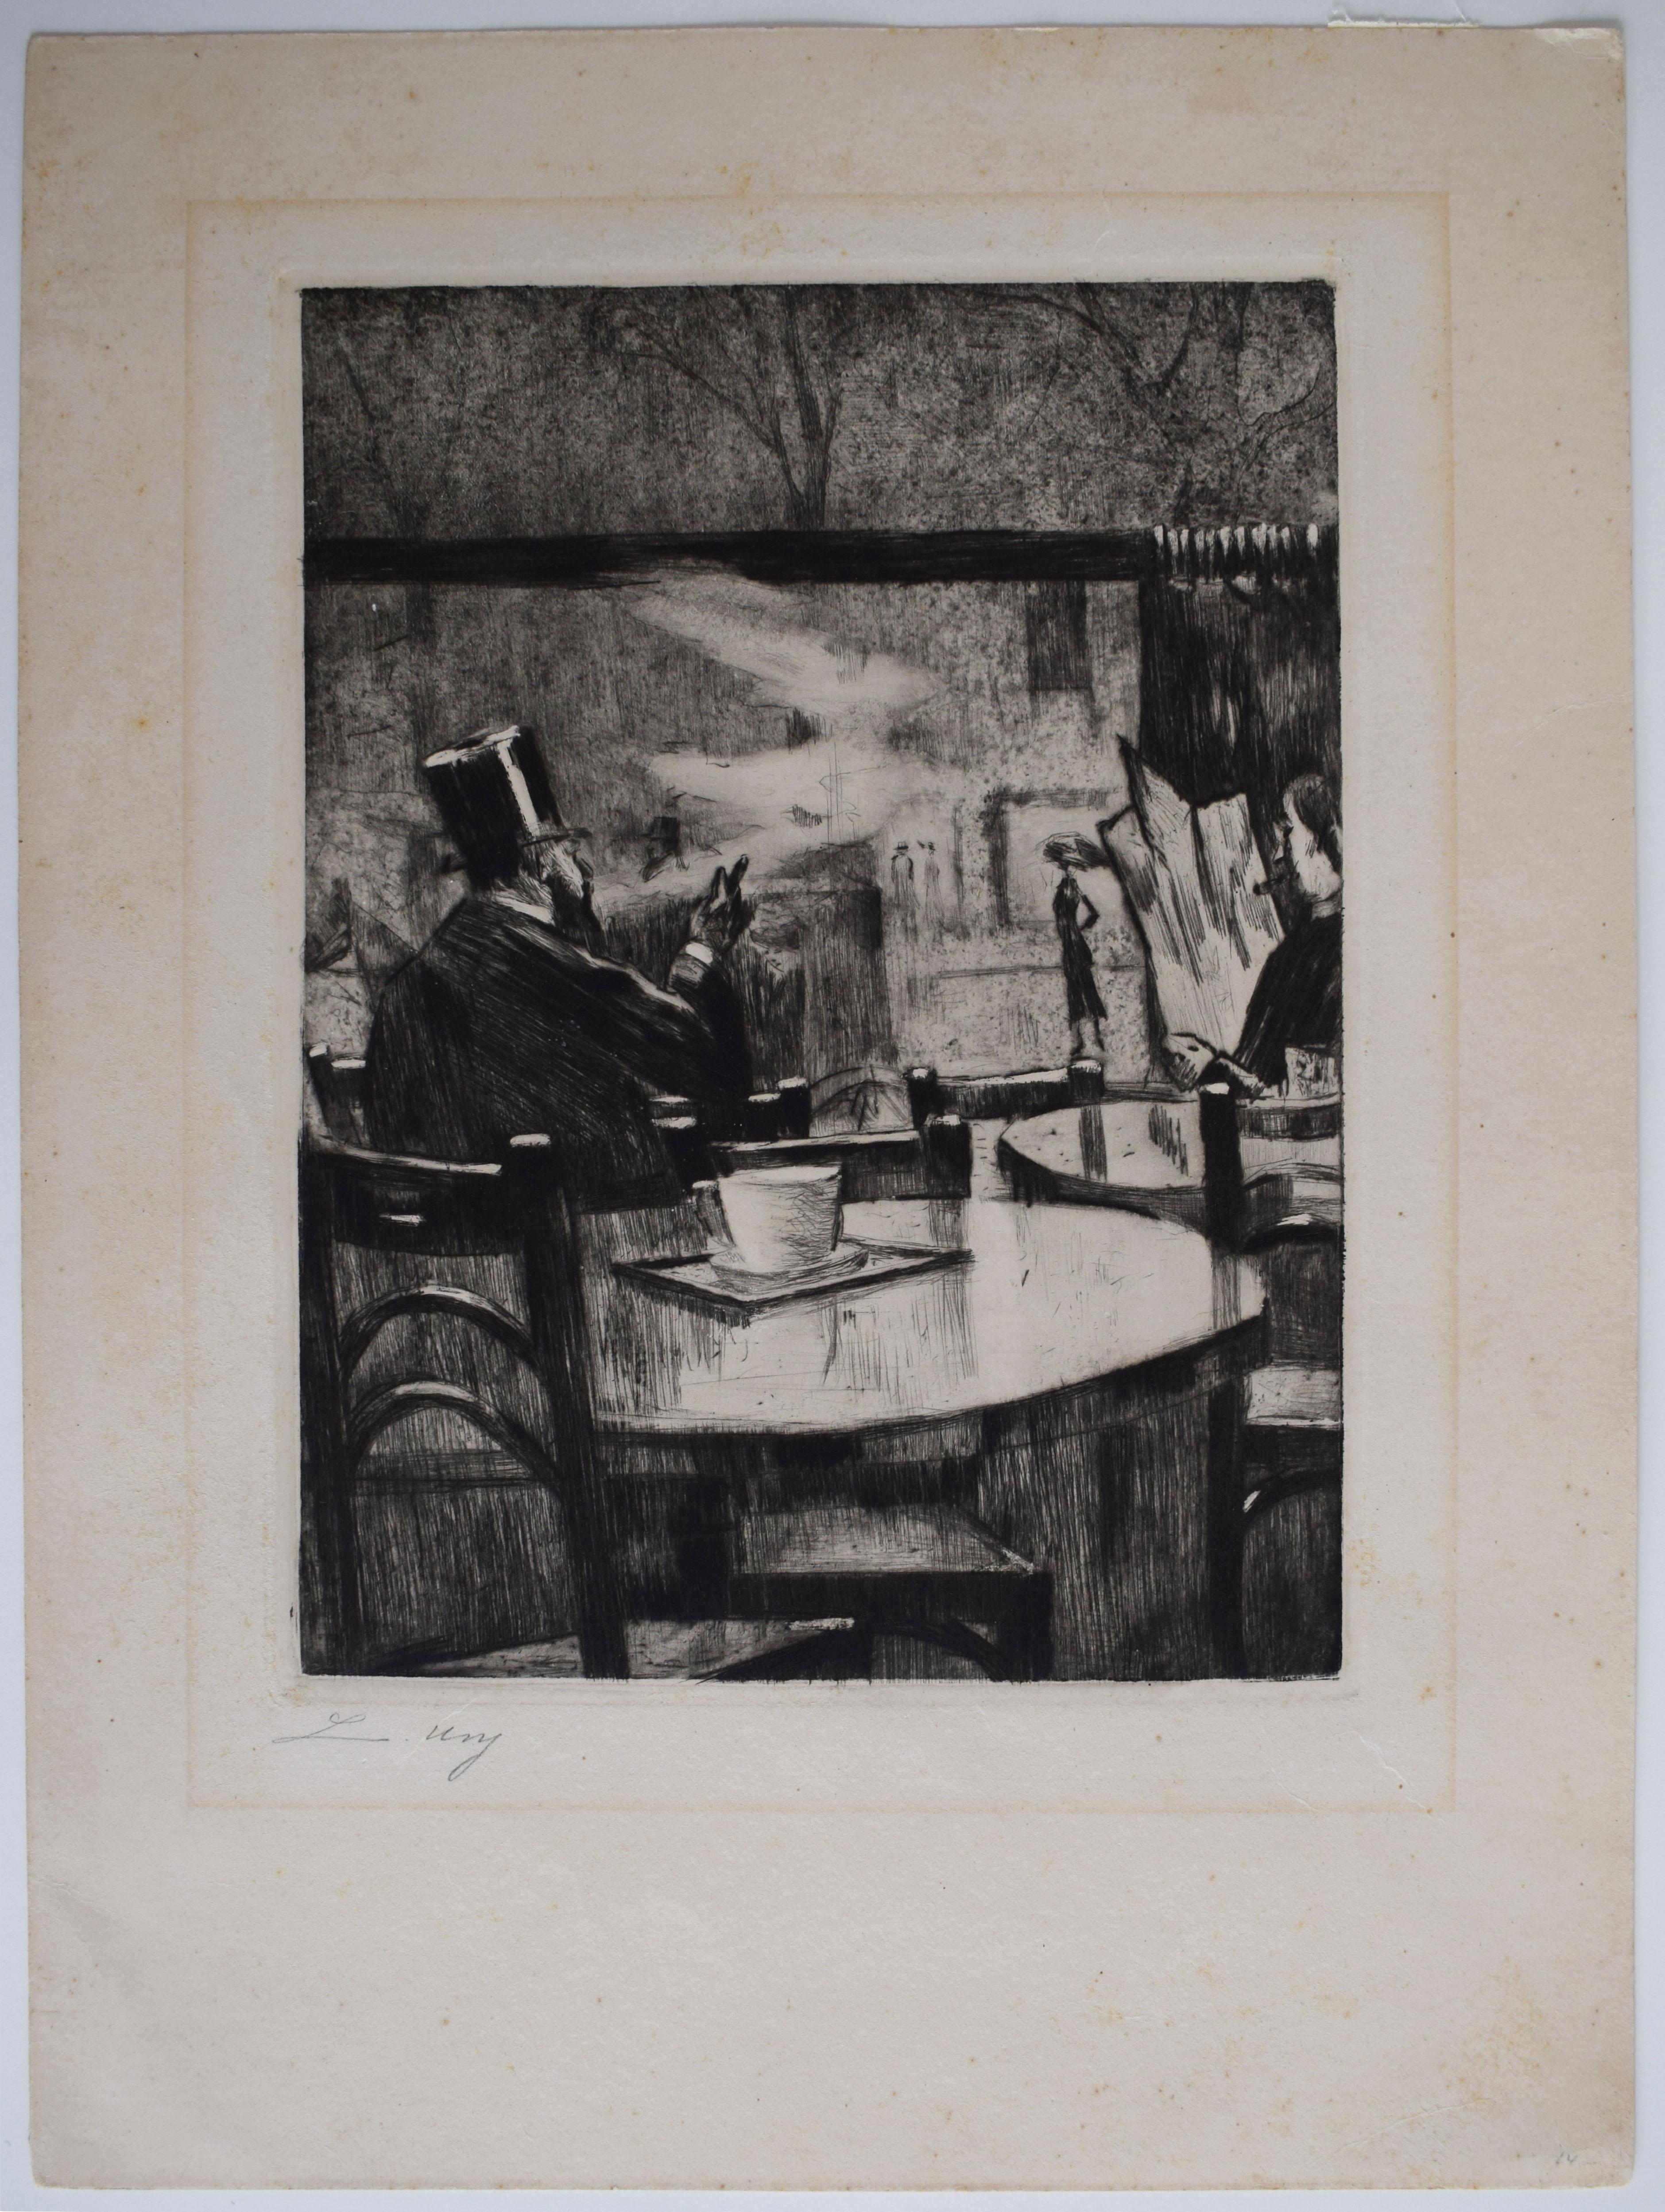 In the Café - German Impressionism Berlin Society Cafe Scene - Print by Lesser Ury